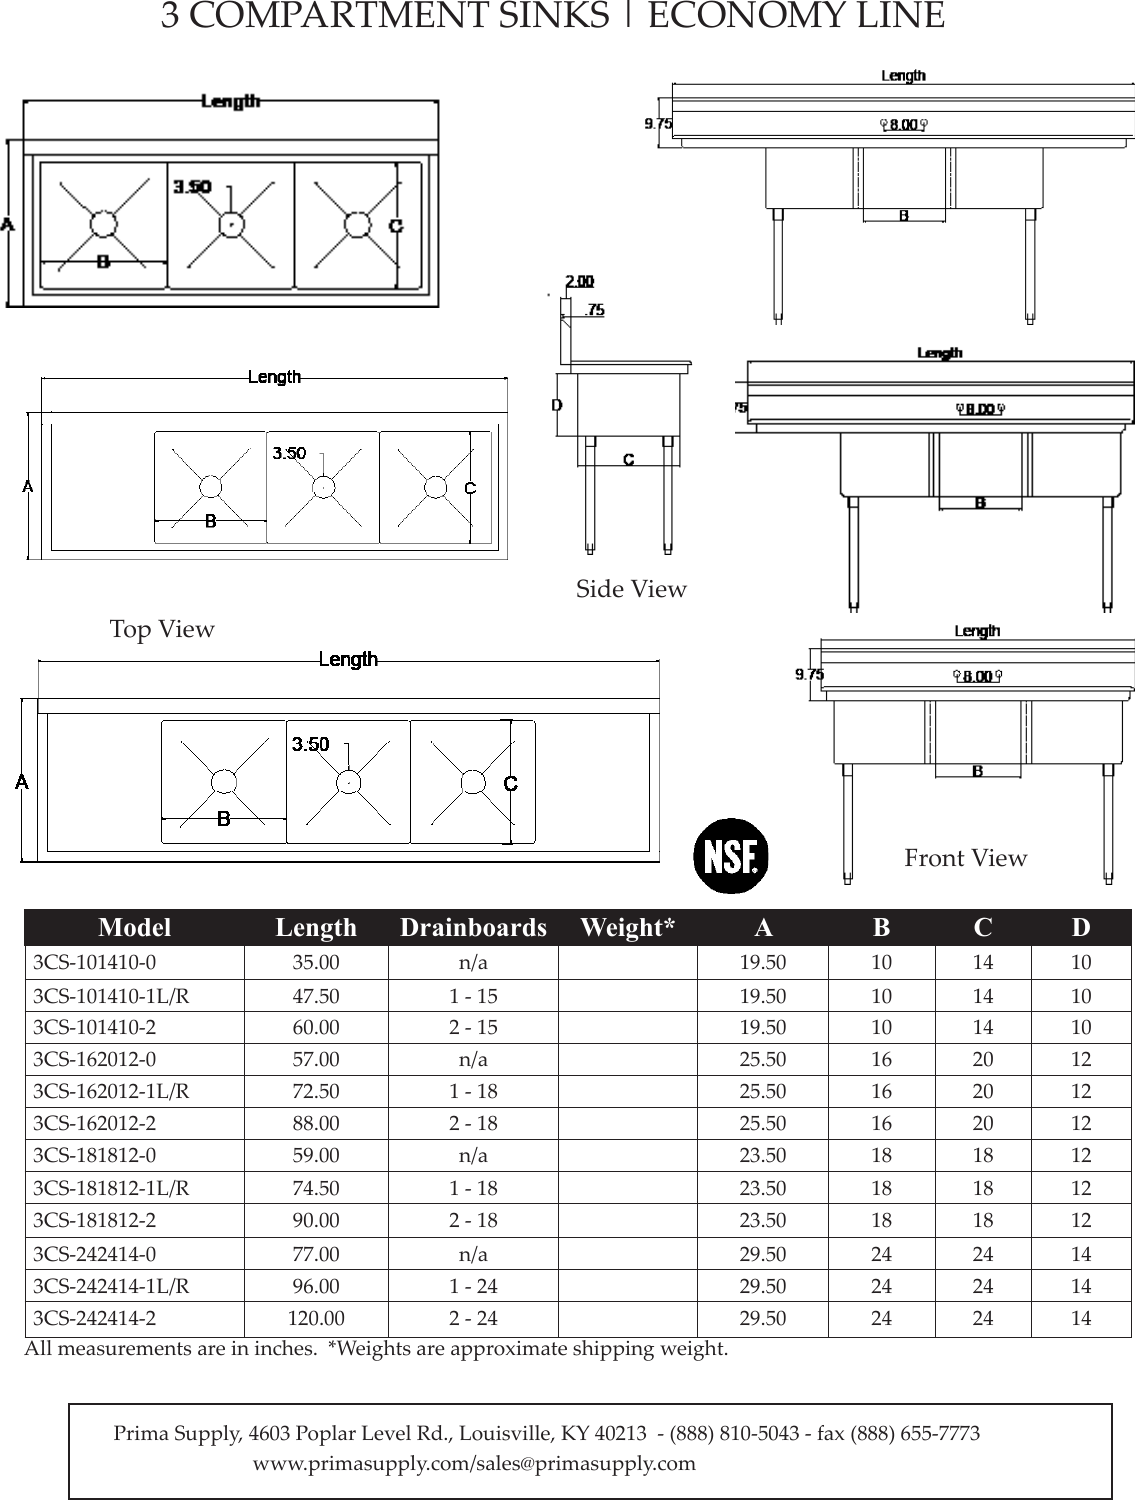 3CompartmentSinks.1339515794 User Guide Page 2 